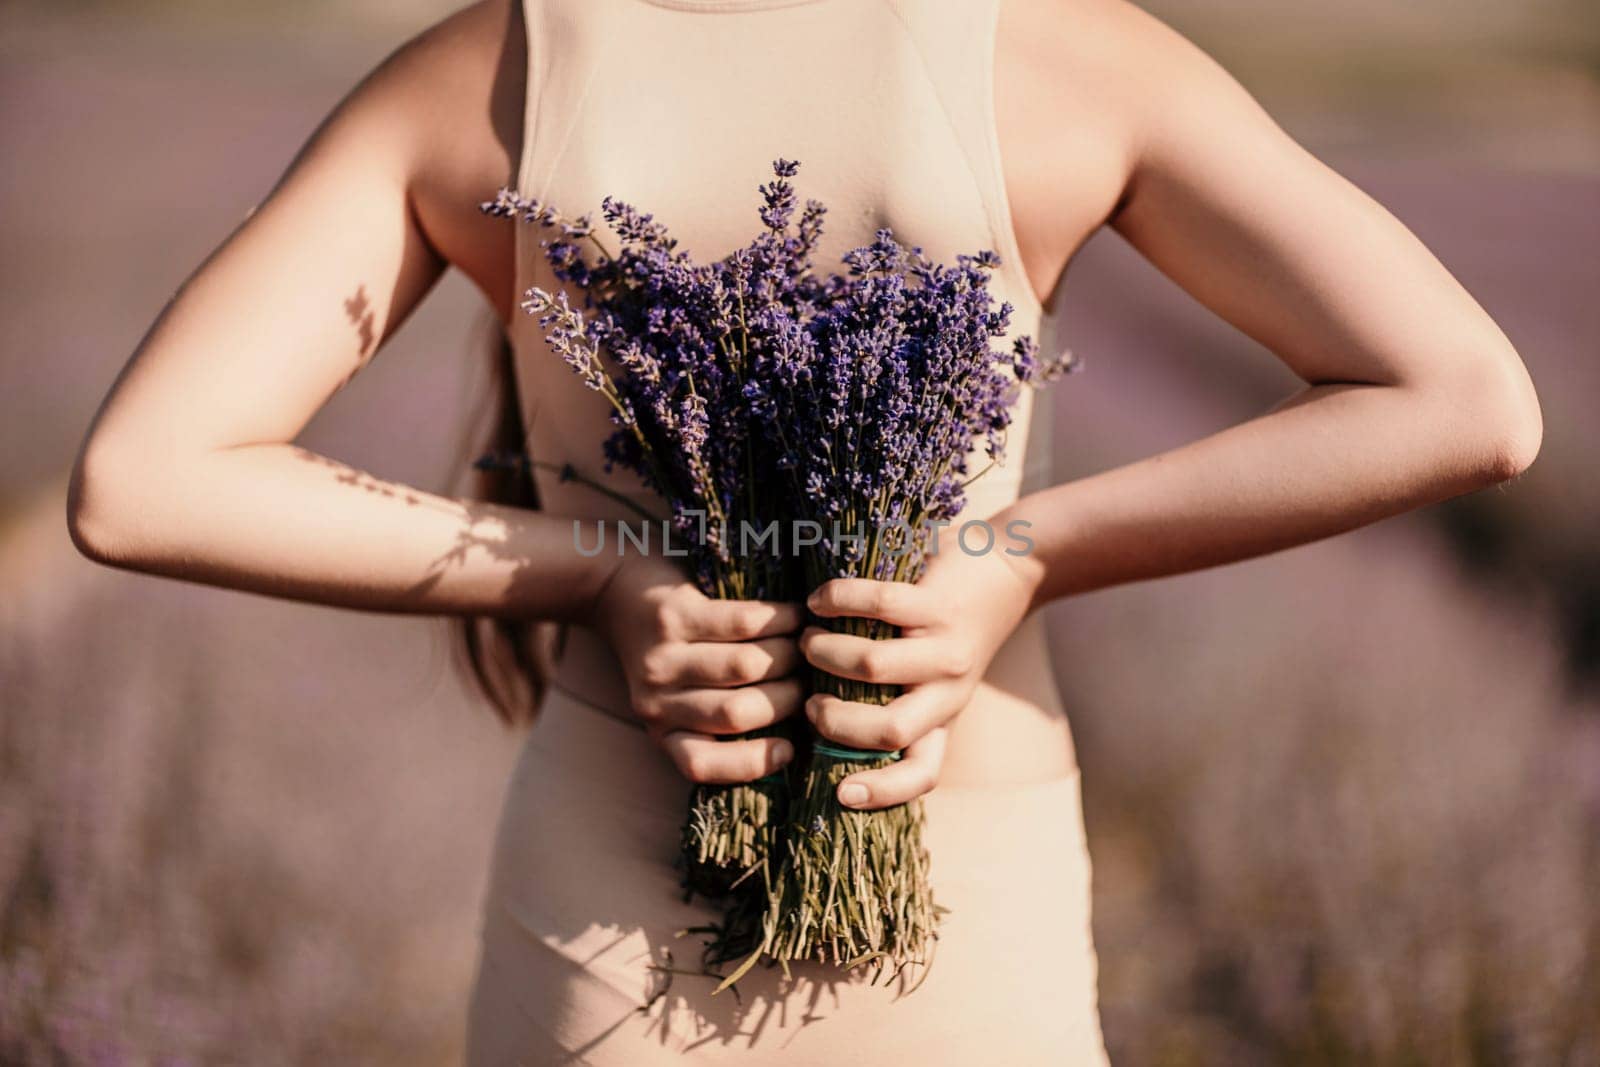 girl holding bouquet lavender flowers. The flowers are purple and the woman is wearing a tan top. Concept of calm and relaxation, as lavender is often associated with these feelings